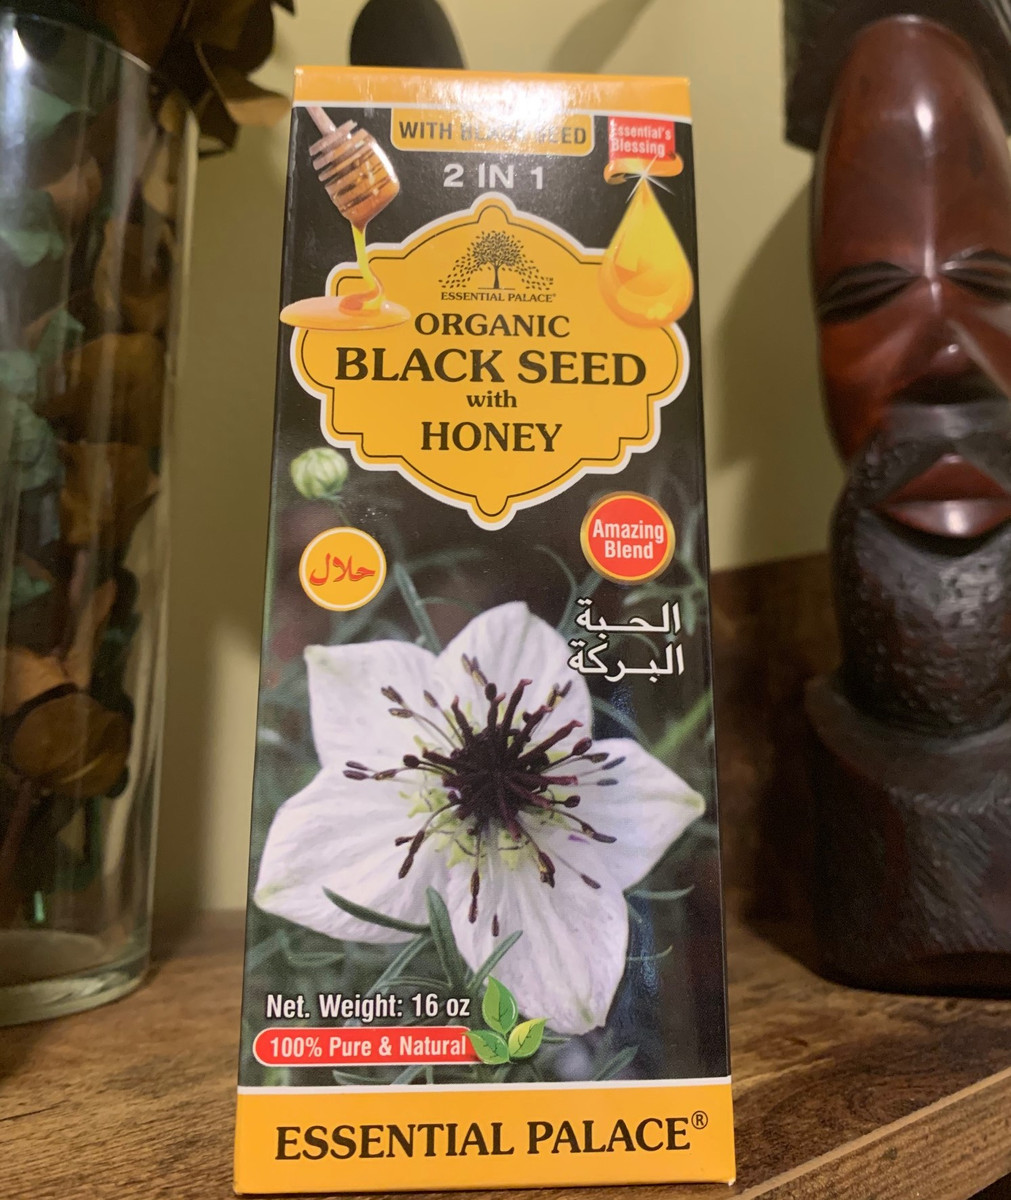 Essential Palace "Black Seed with Honey"